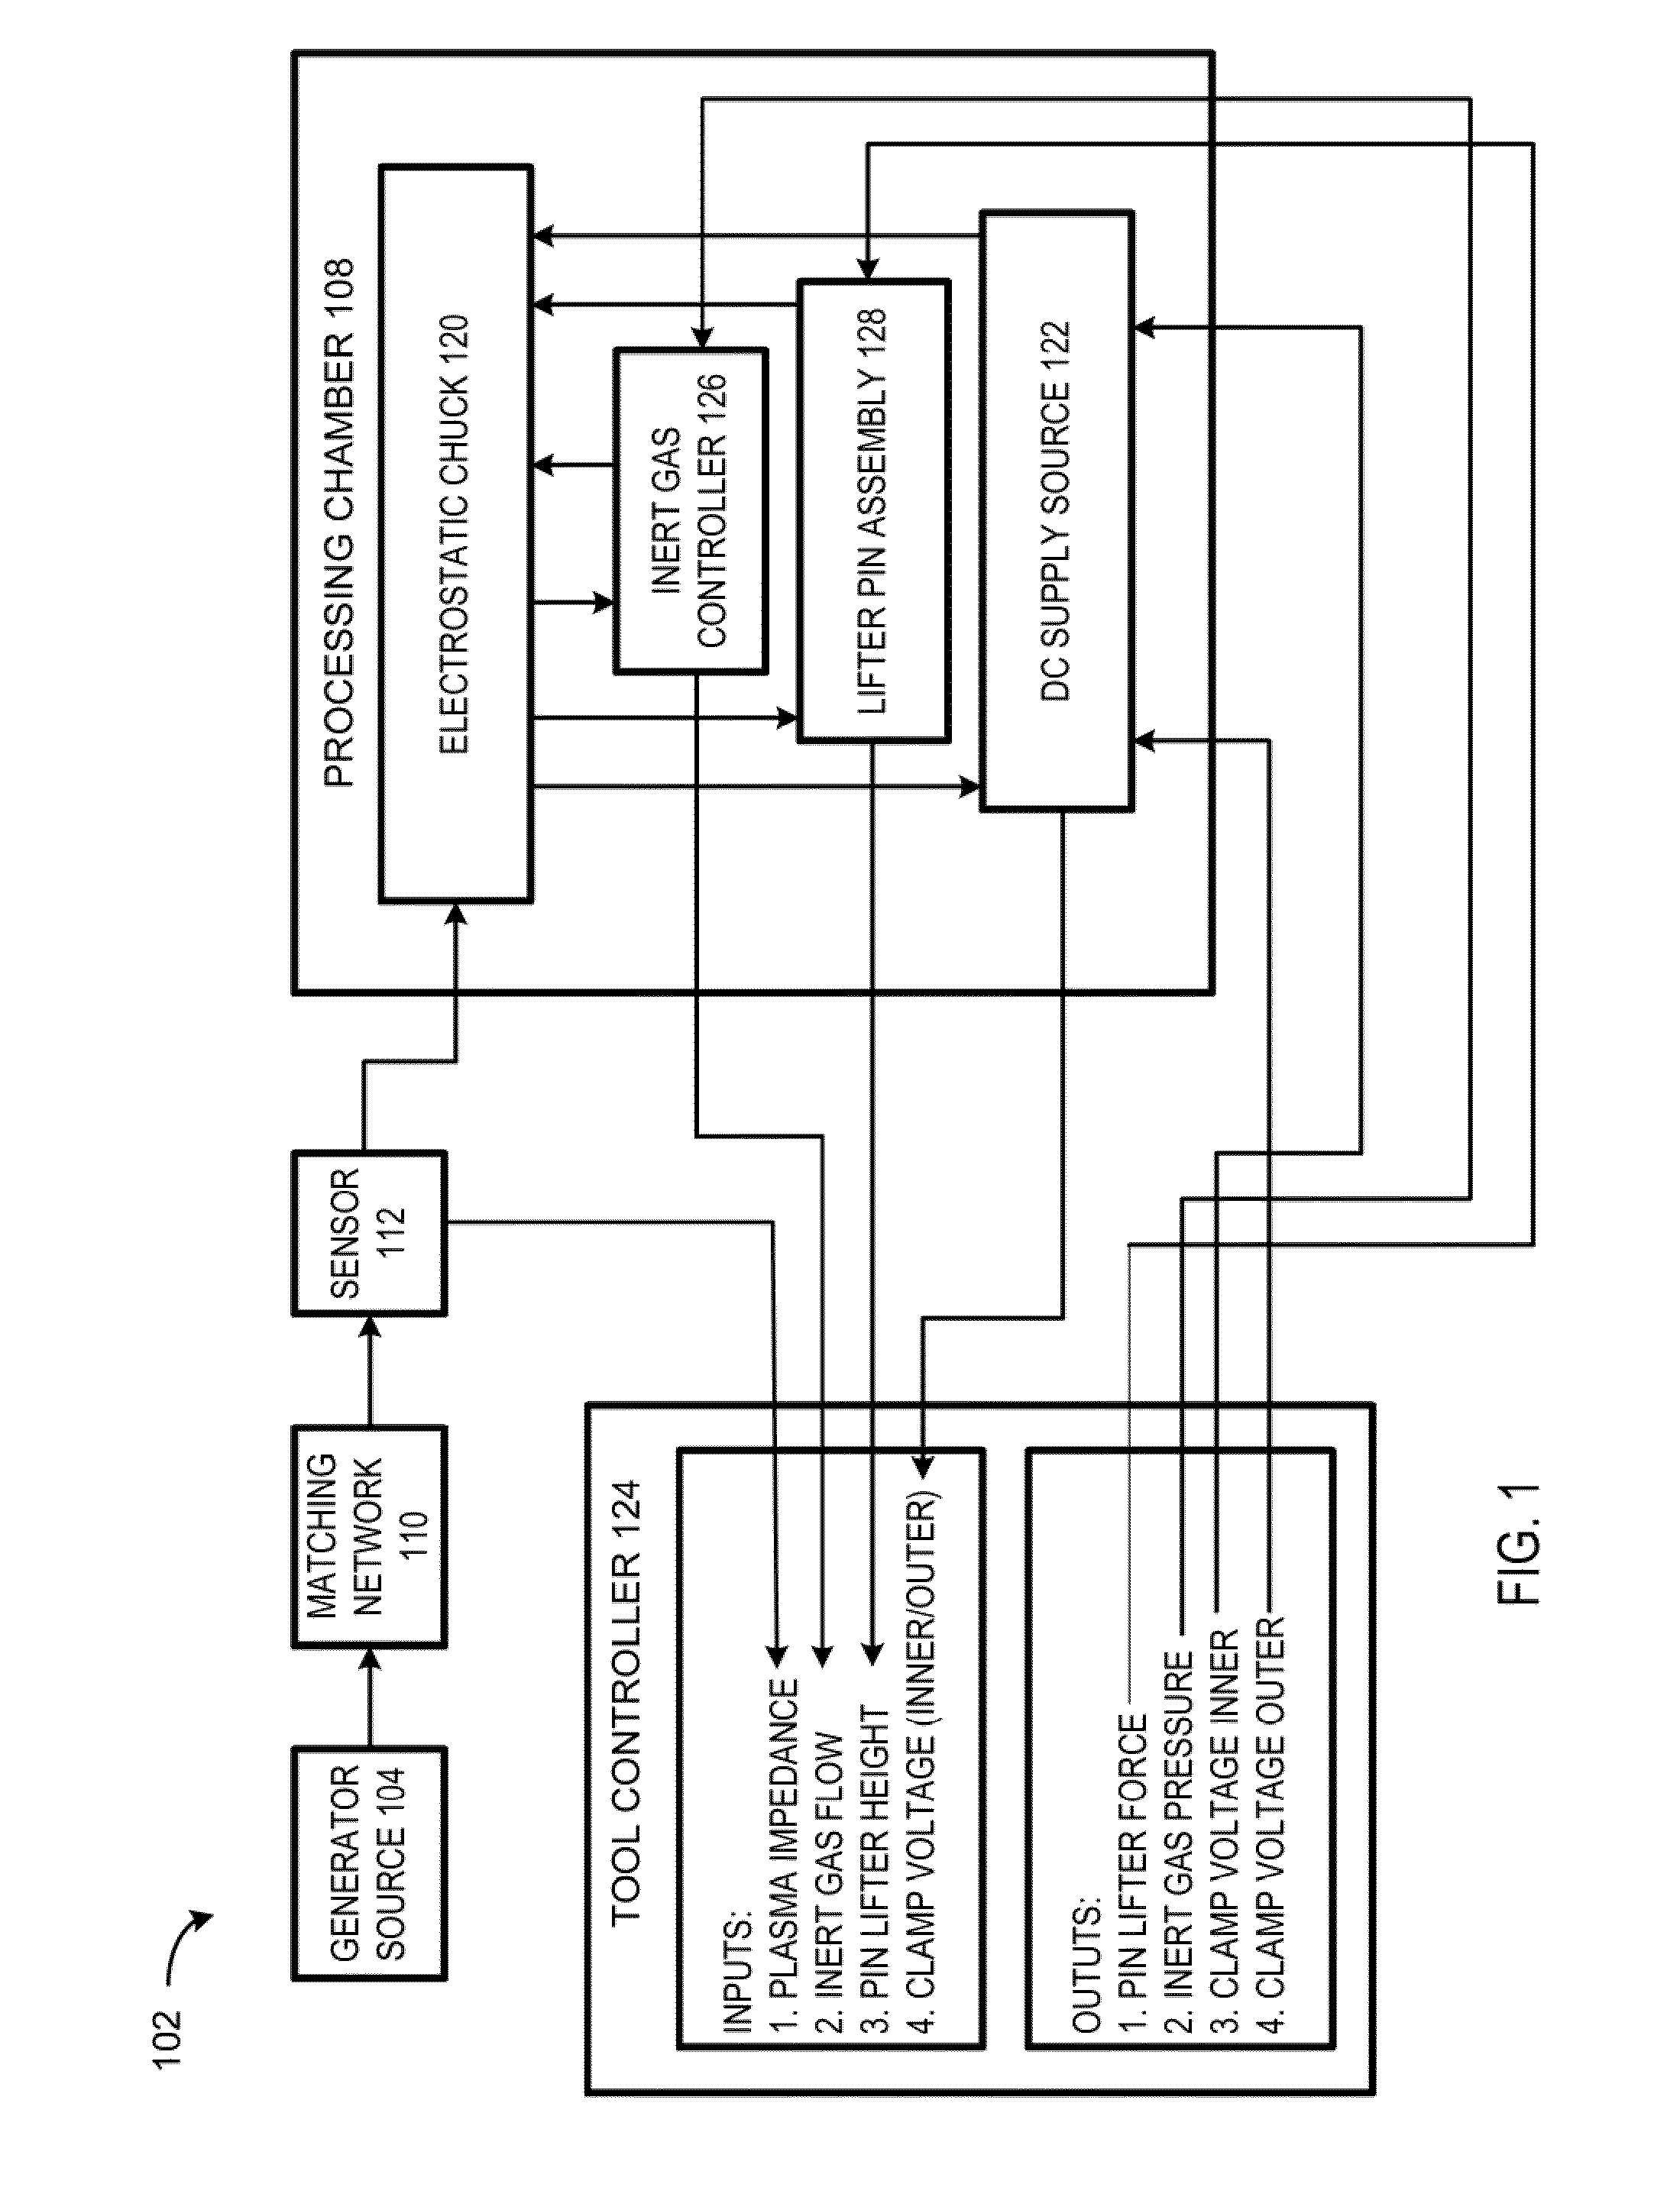 Methods and arrangement for plasma dechuck optimization based on coupling of plasma signaling to substrate position and potential